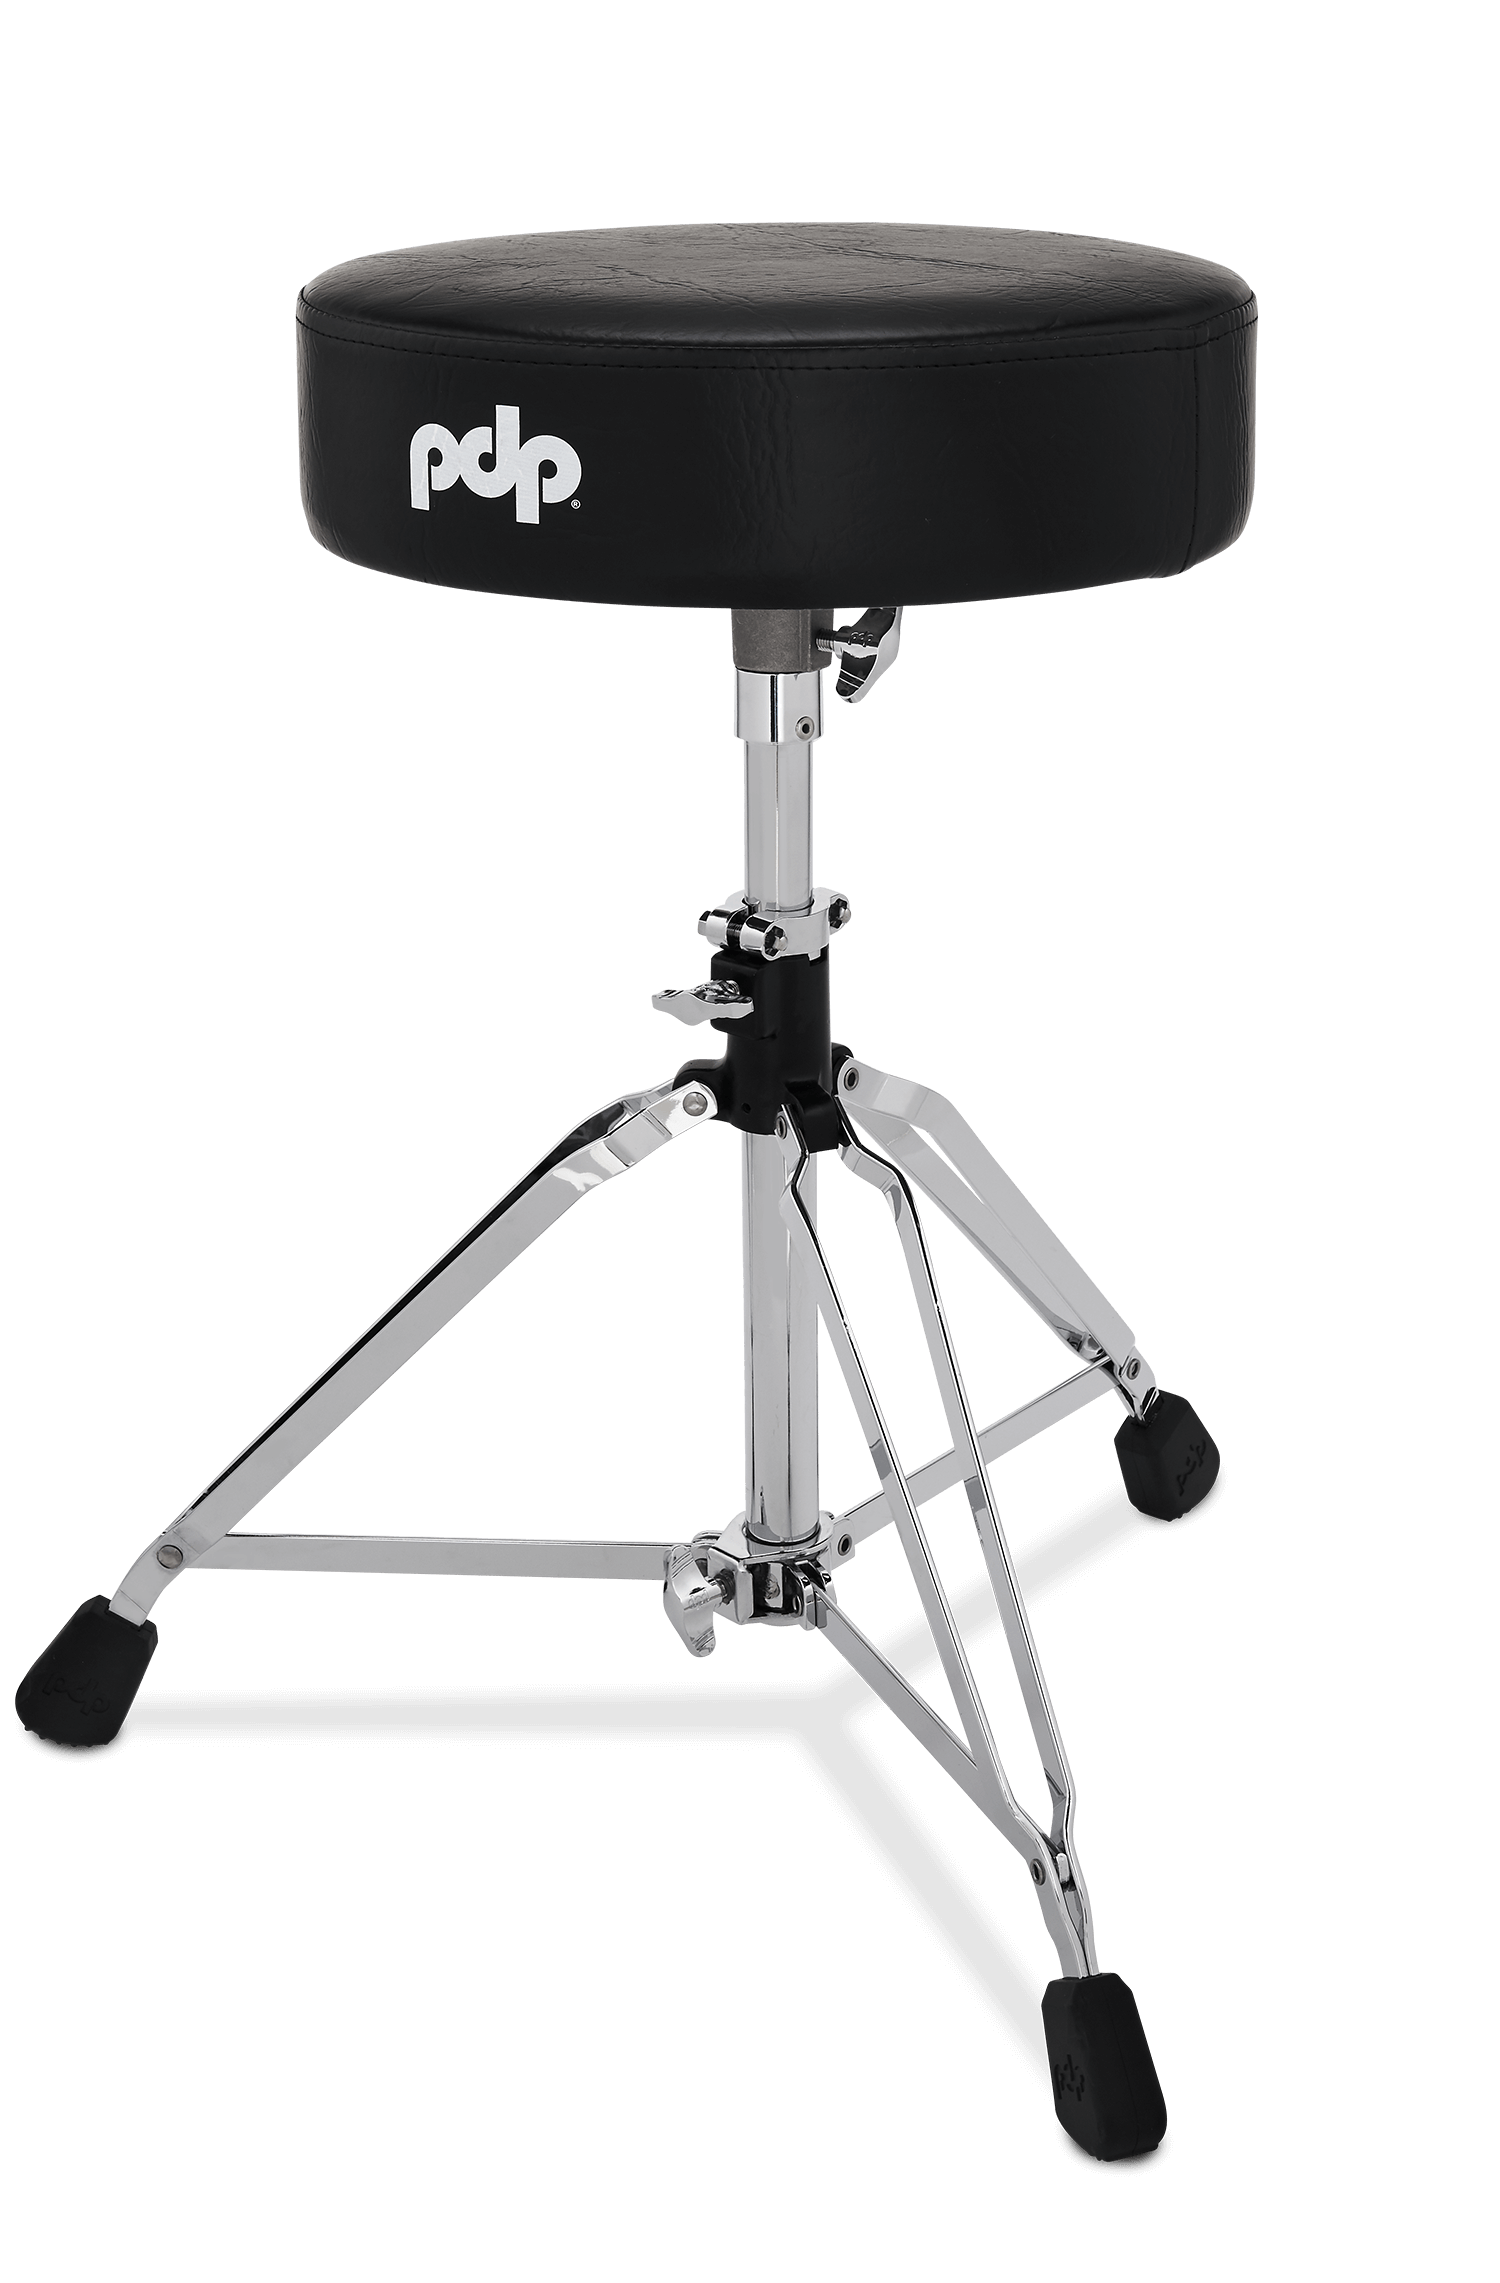 PDP 800 Series Drum Throne 13" Round Top